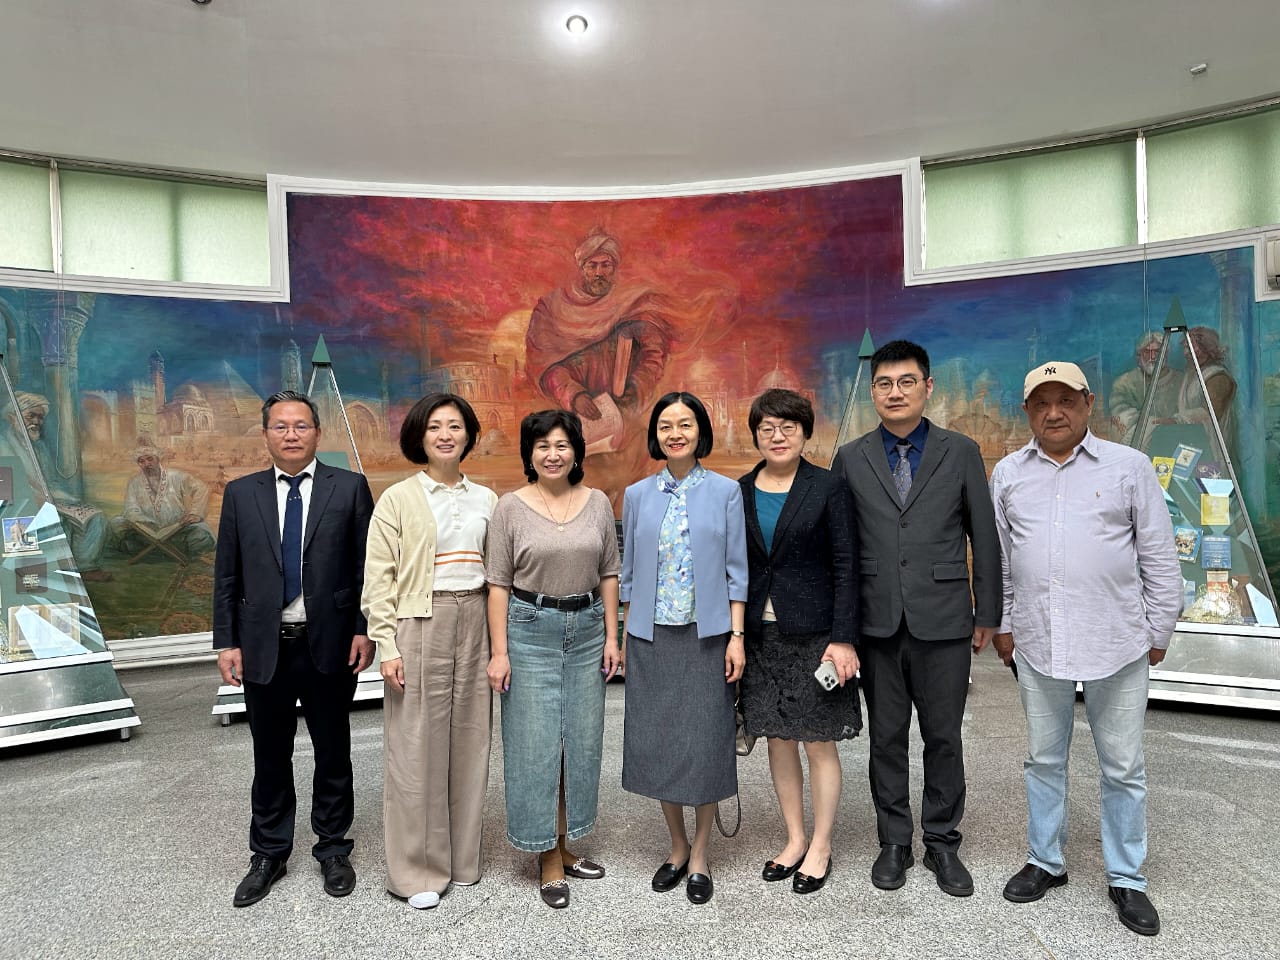 Vice-rectors of Shanghai University of Science and Technology visited the museum